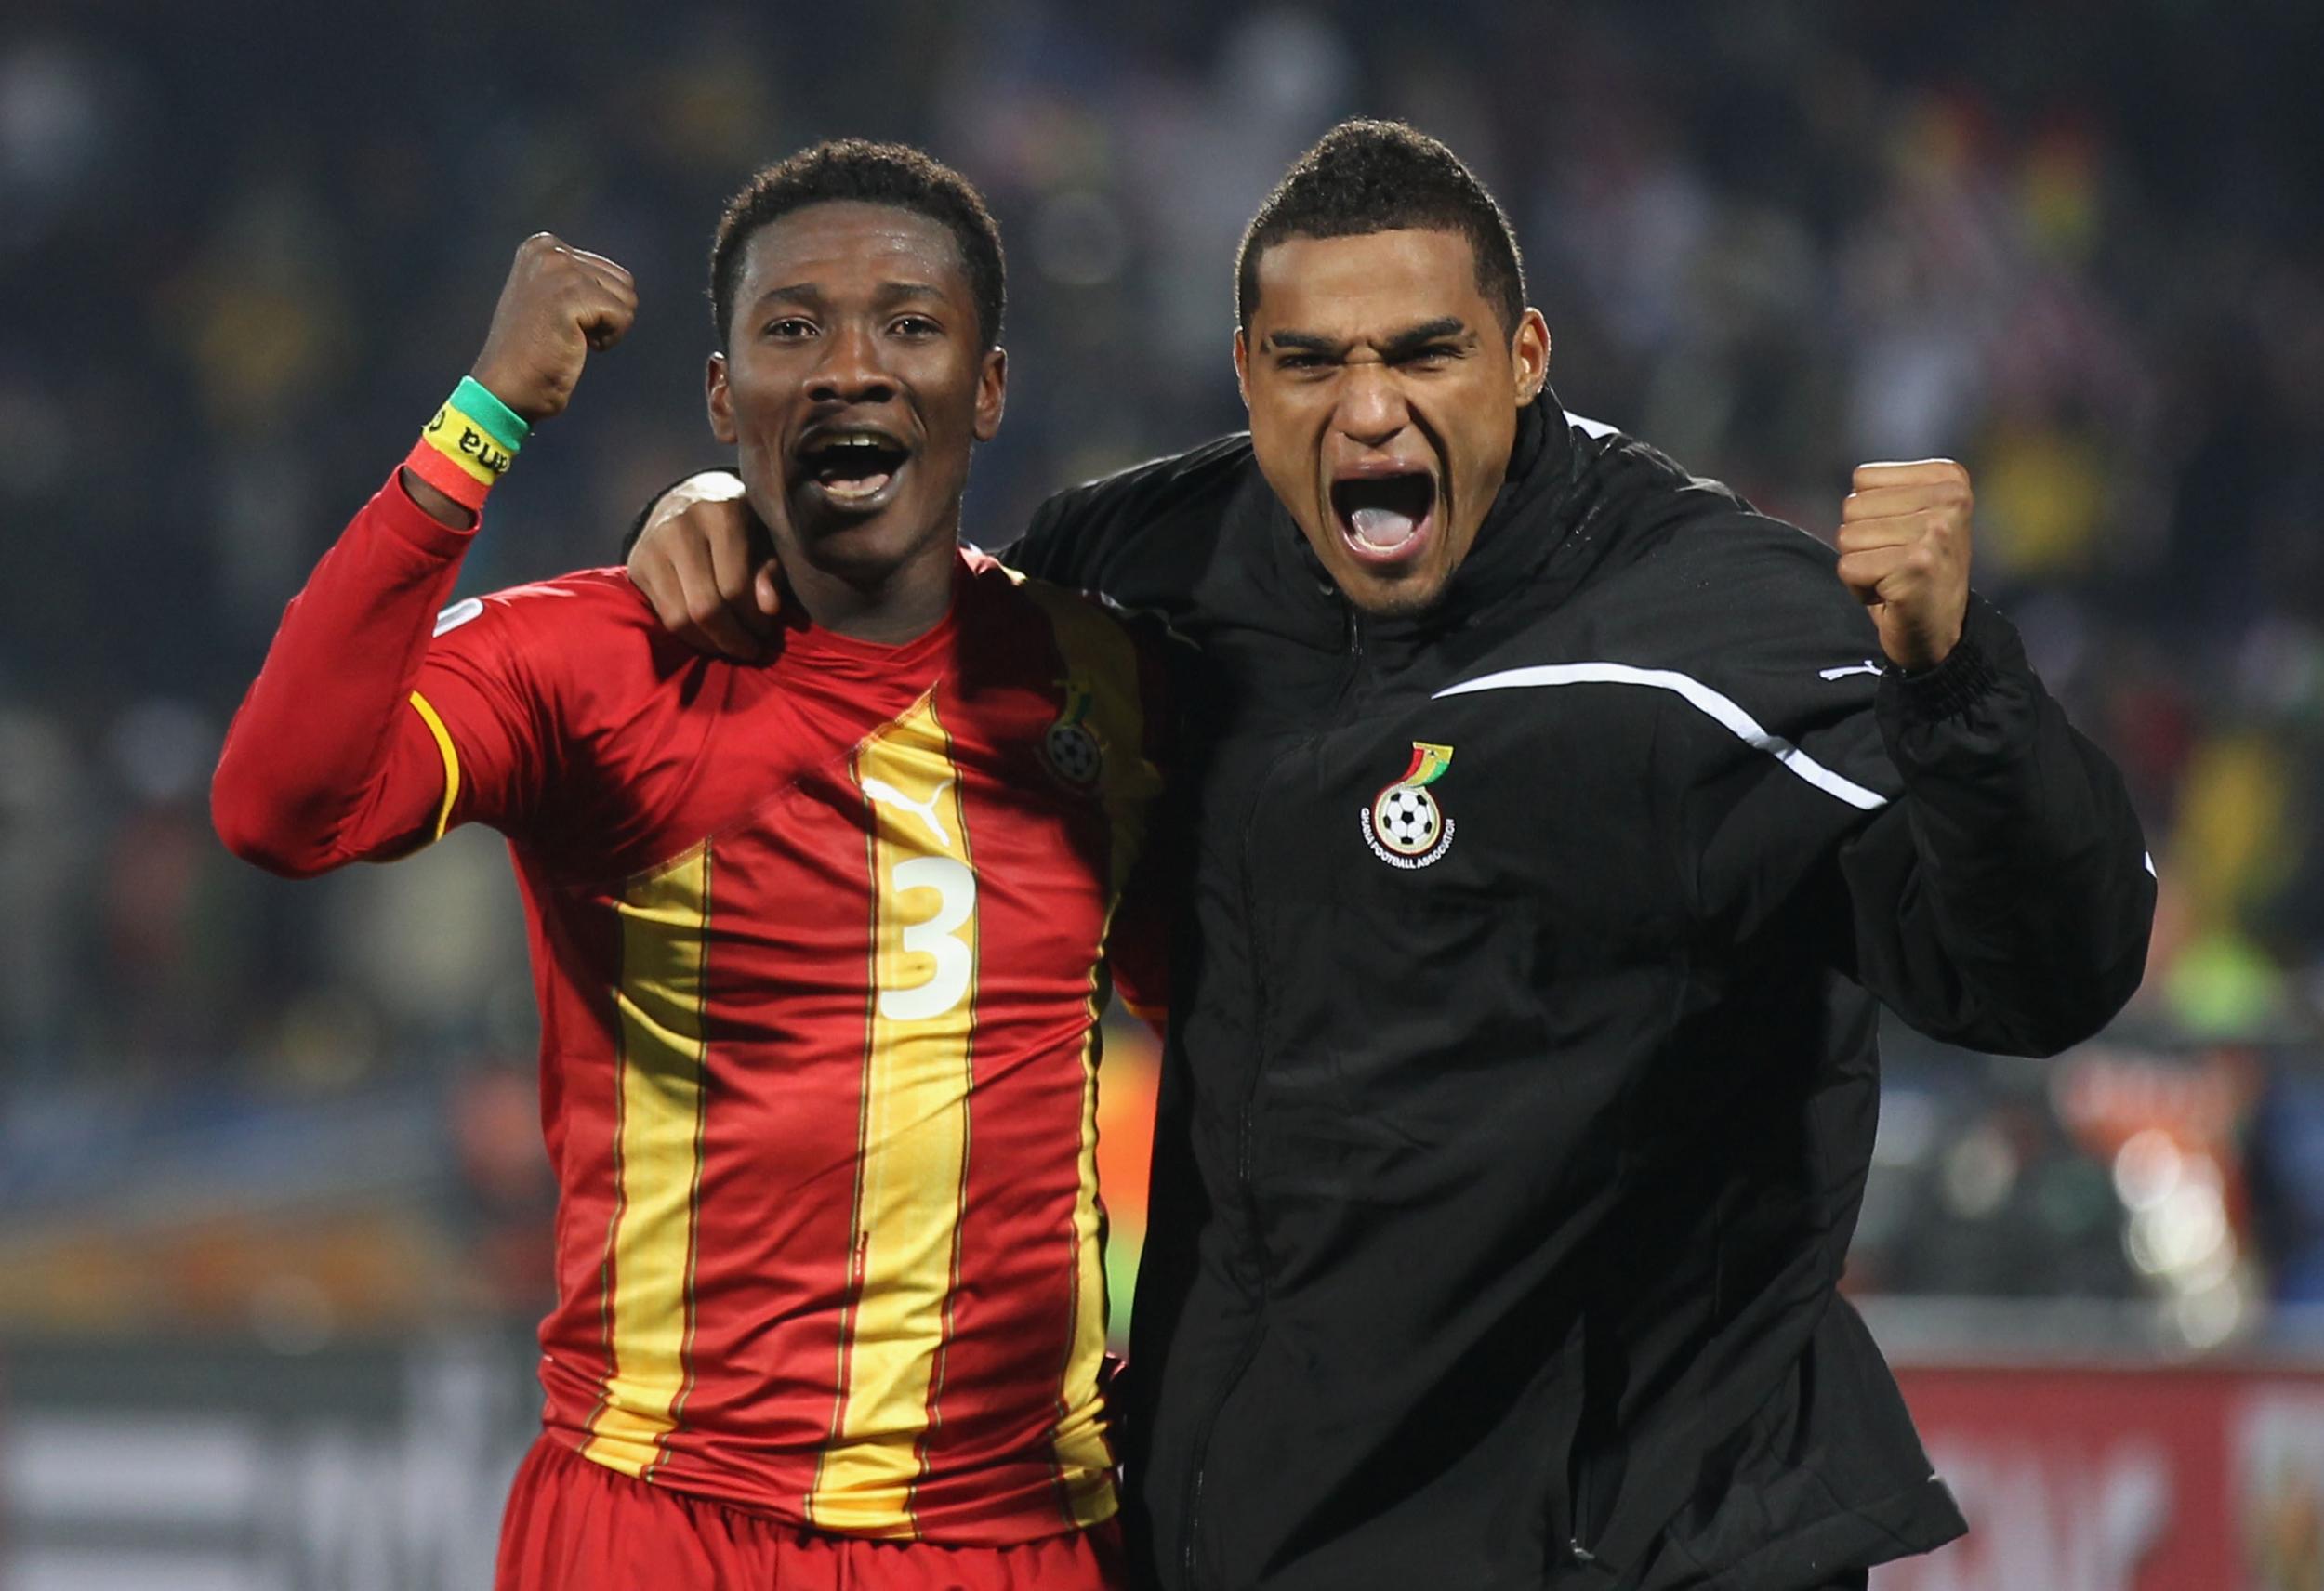 Asamoah Gyan and Kevin-Prince Boateng celebrate reaching the quarter-finals